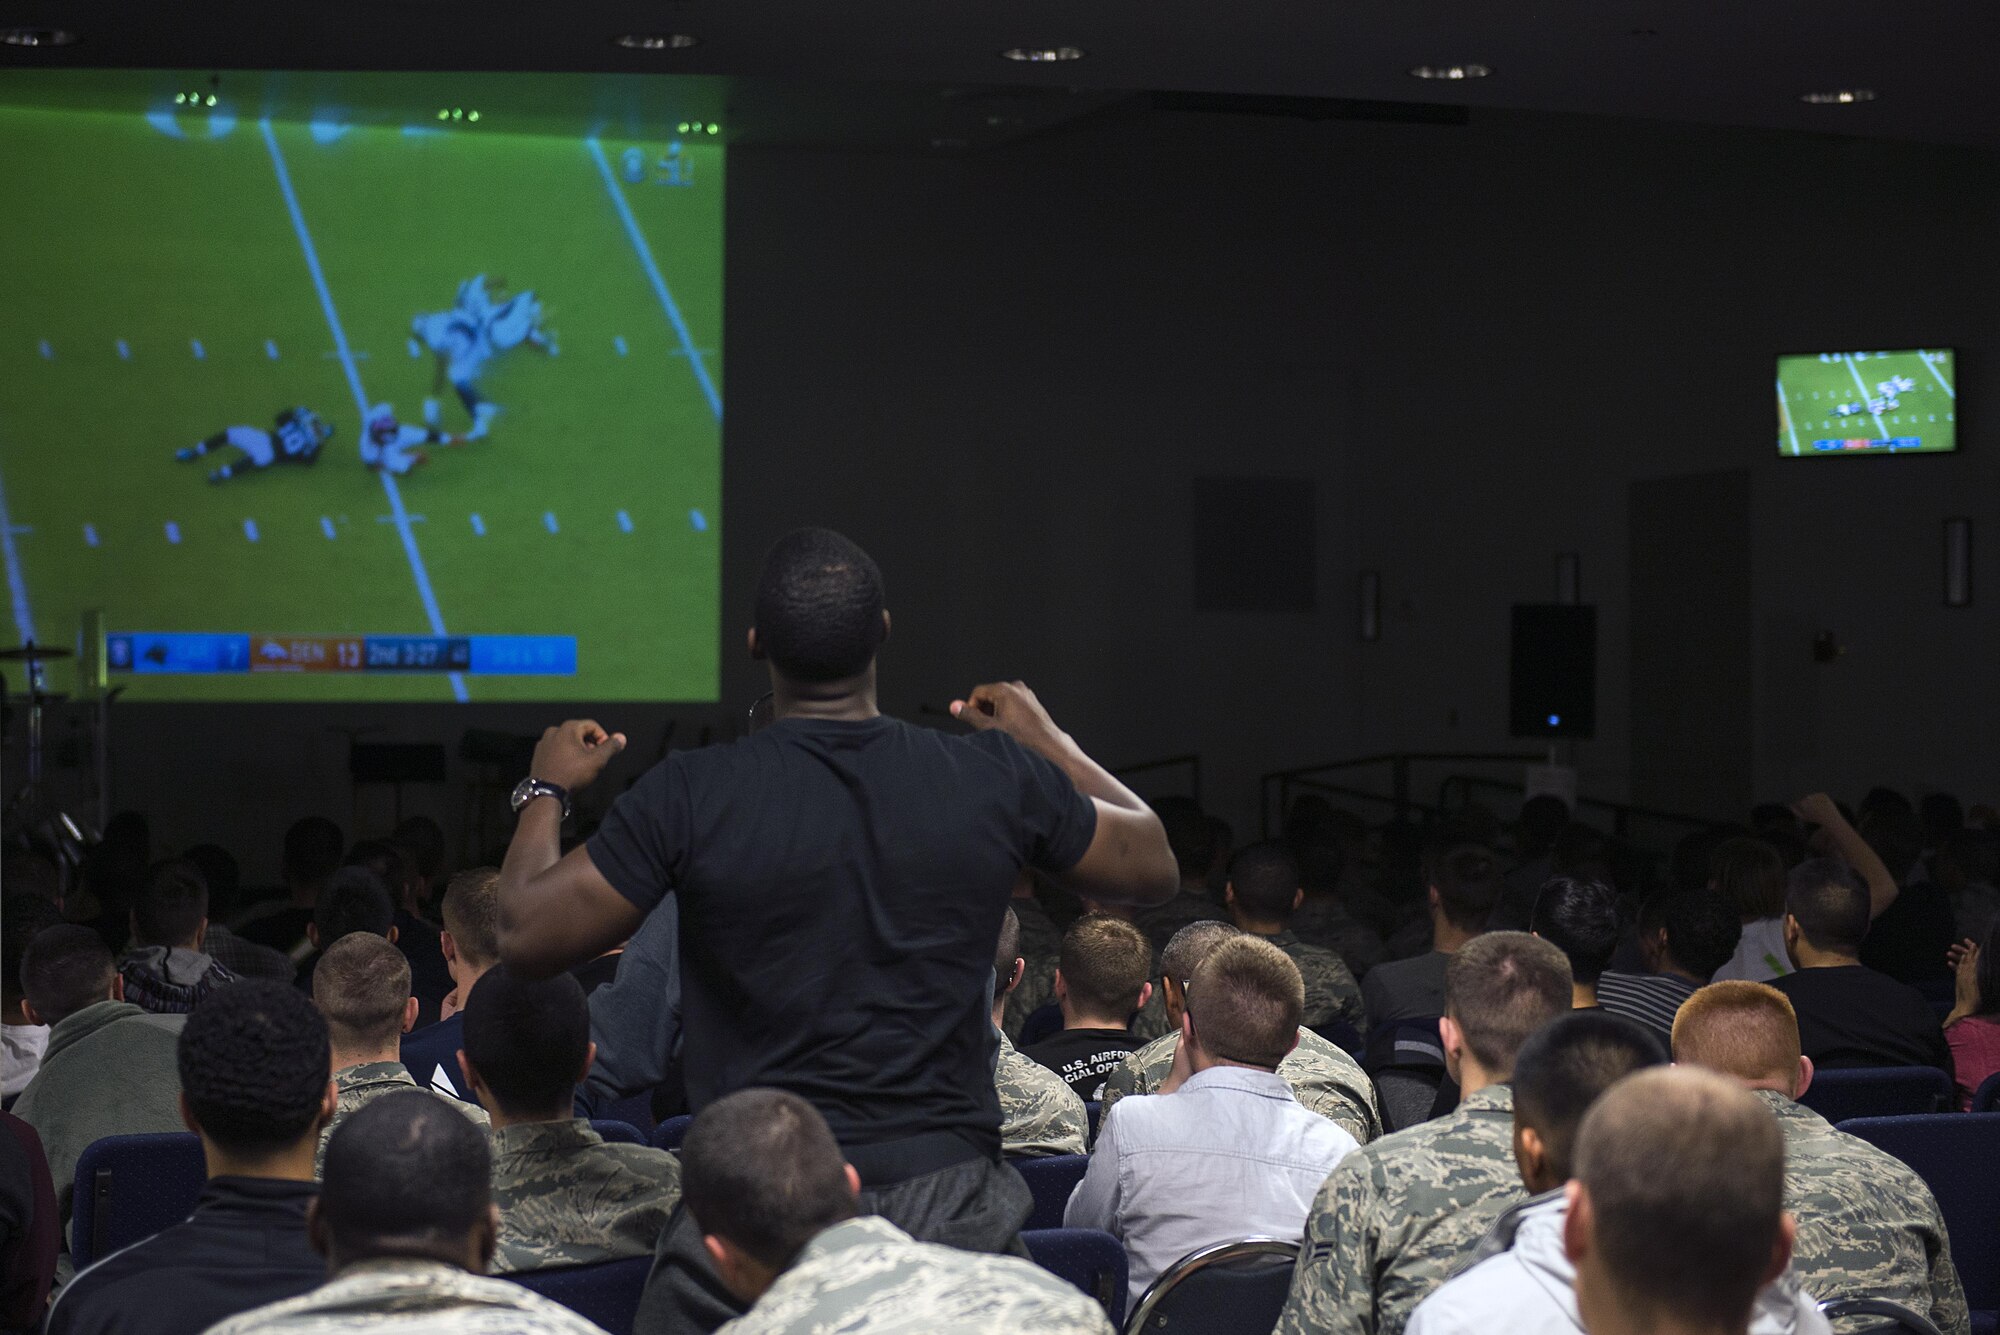 The Sheppard Air Force Base, Texas, Chapel staff served more than 400 people on Super Bowl Sunday, investing nearly $800 in their spiritual health, morale and well-being, Feb. 7, 2016. Sheppard chaplains also serve nearly 180,000 visitors annually, with the largest Airman Ministry Center in the Air Force. (U.S. Air Force photo/Senior Airman Kyle Gese)